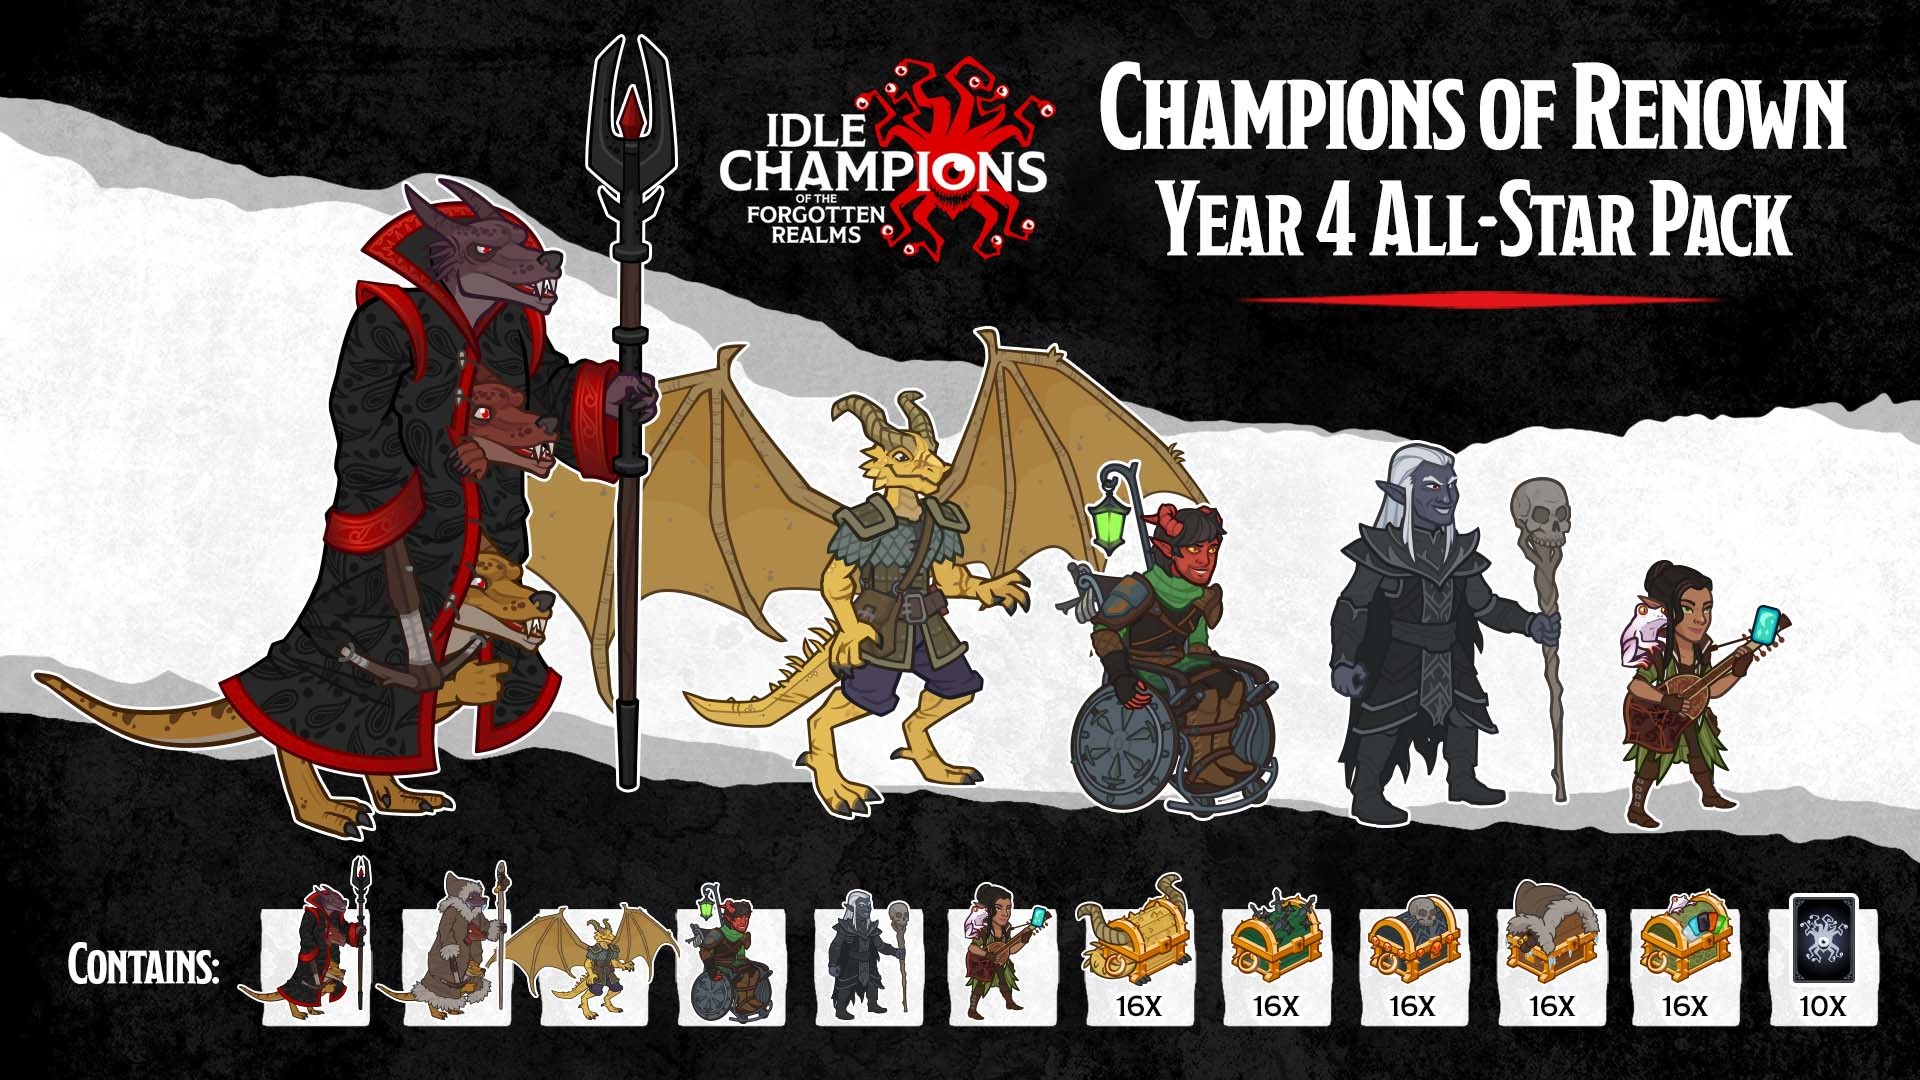 Idle Champions - Champions of Renown: Year 4 All-Star Pack Featured Screenshot #1